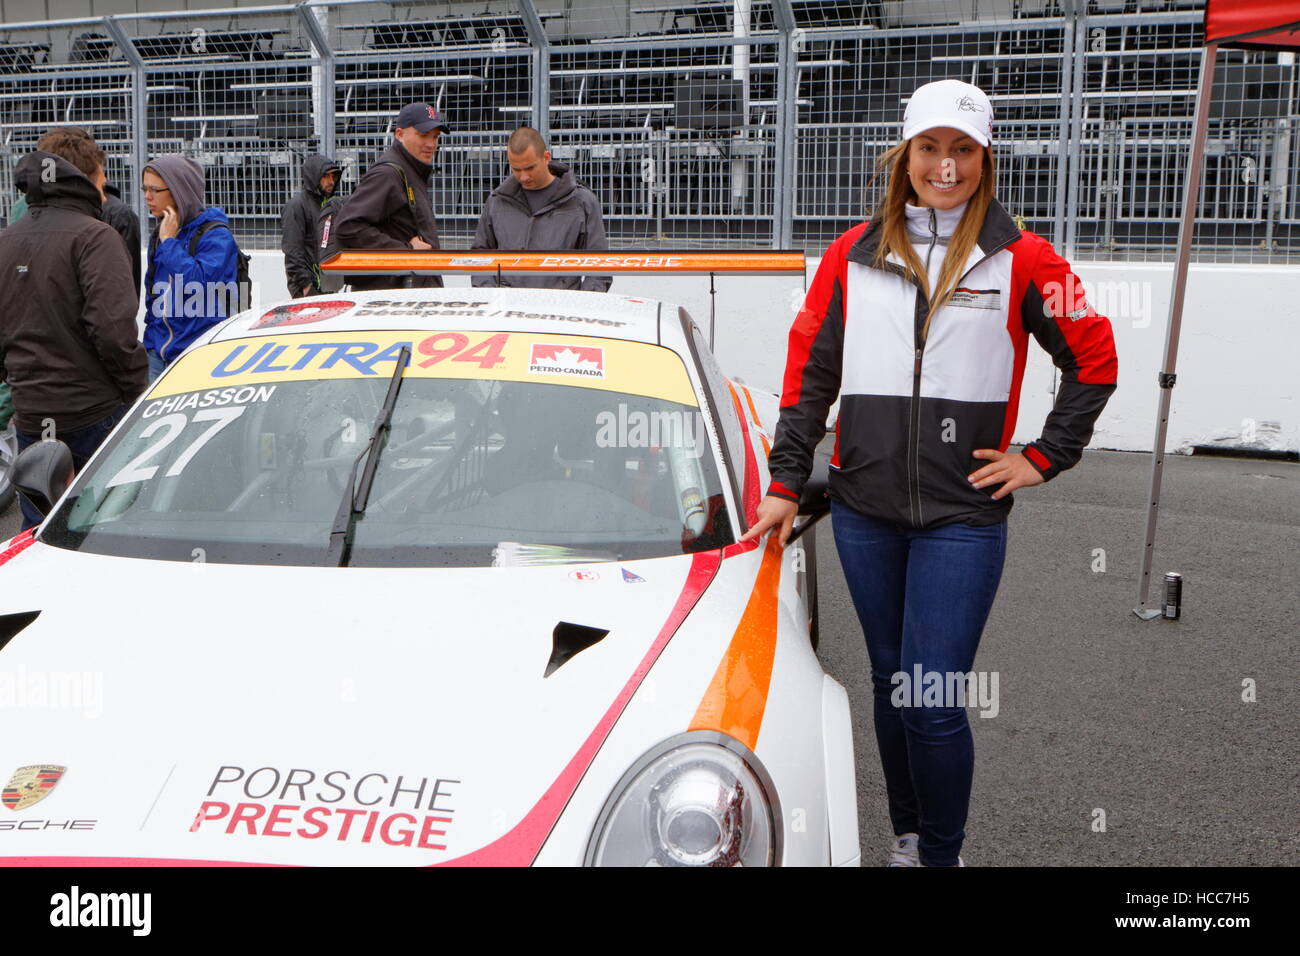 Quebec business woman and race car driver, Valerie Chiasson poses beside her Porsche which she will race in the Porsche GT#Cup Challenge at Circuit Stock Photo